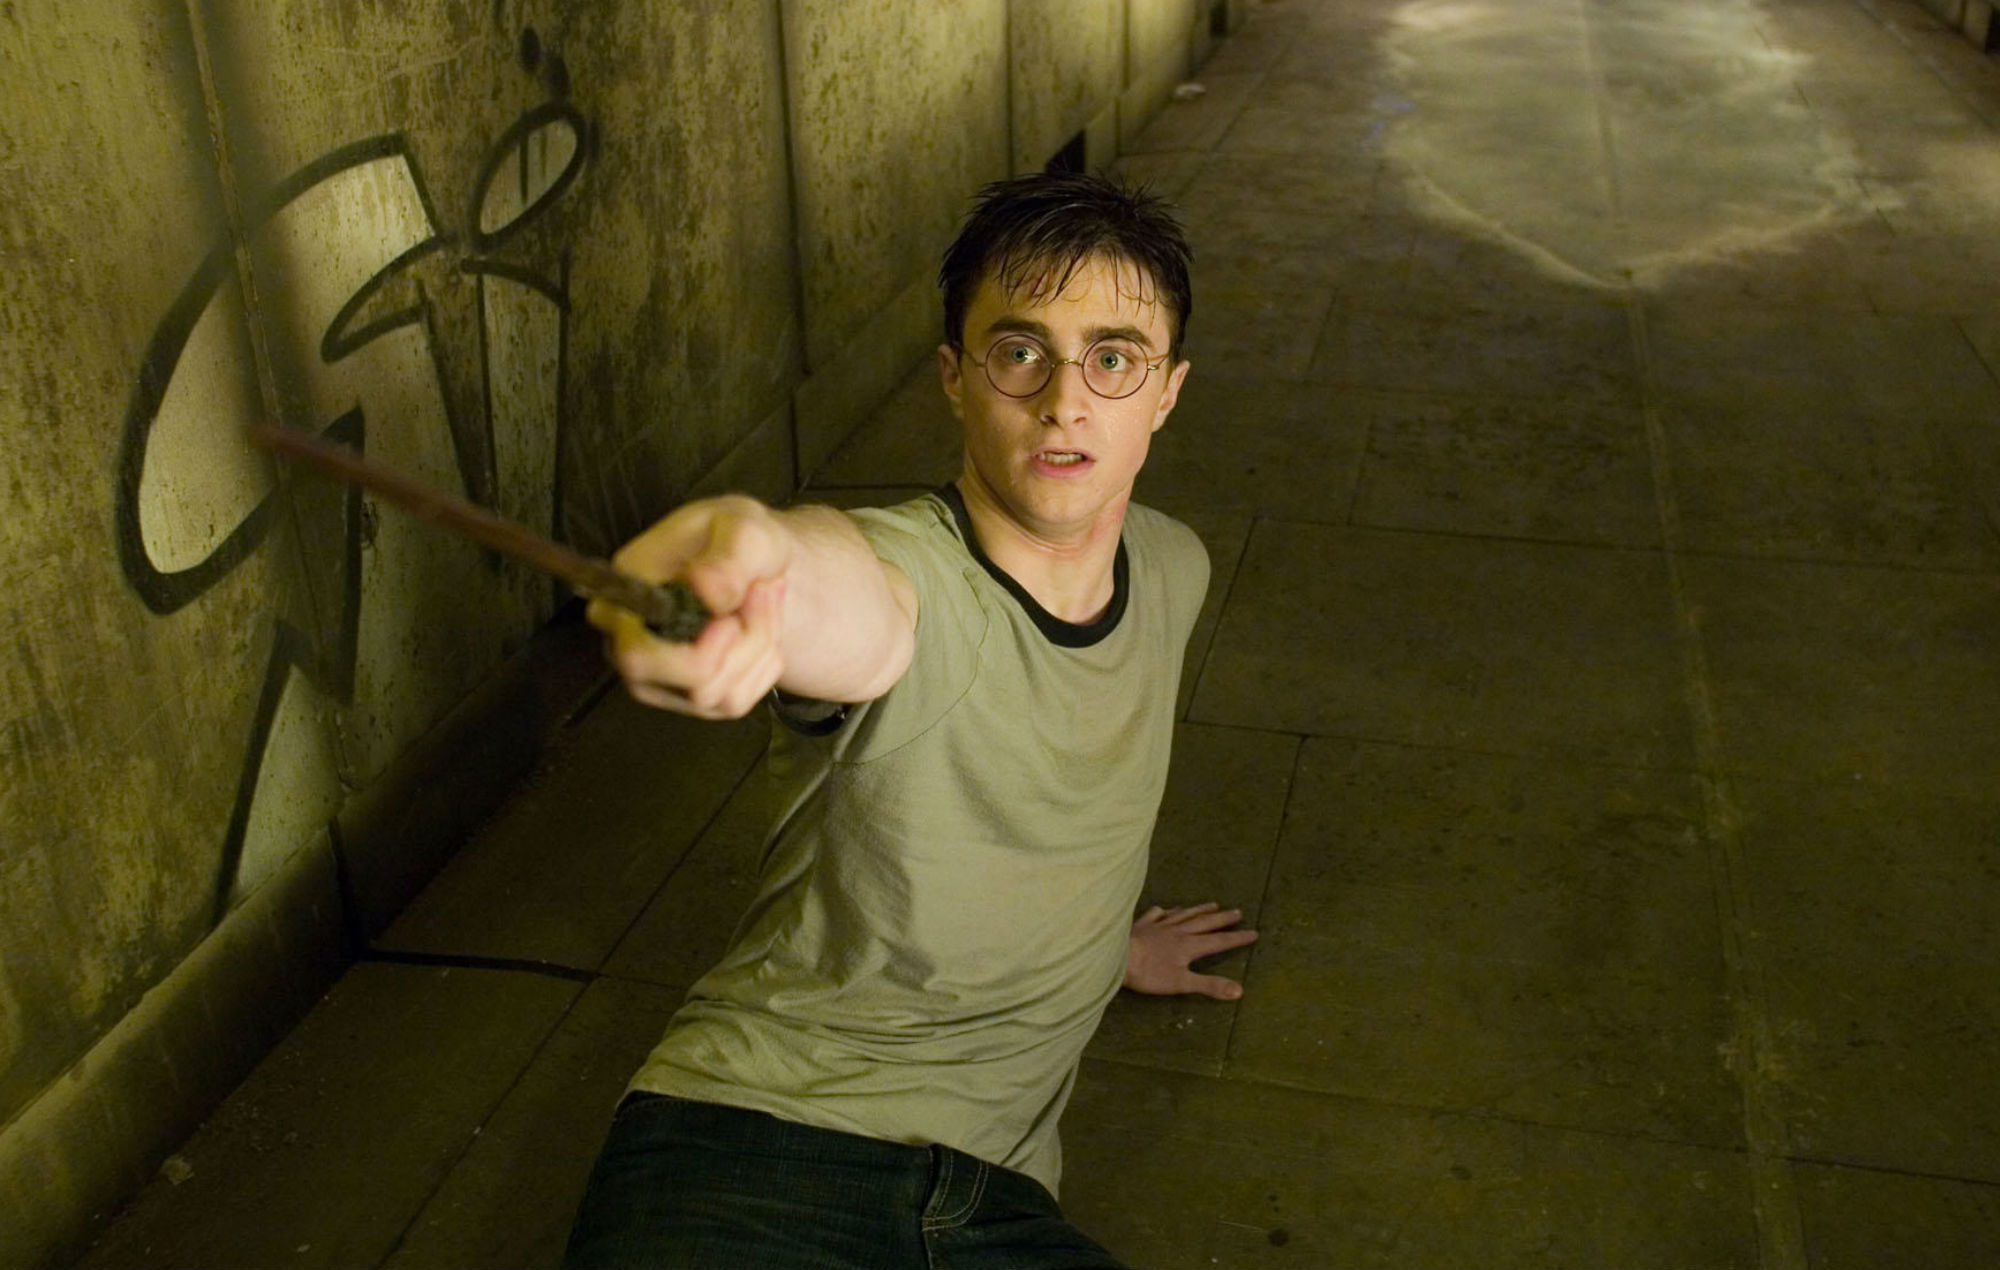 ‘Harry Potter’: Daniel Radcliffe “very excited to have torch passed” in TV series